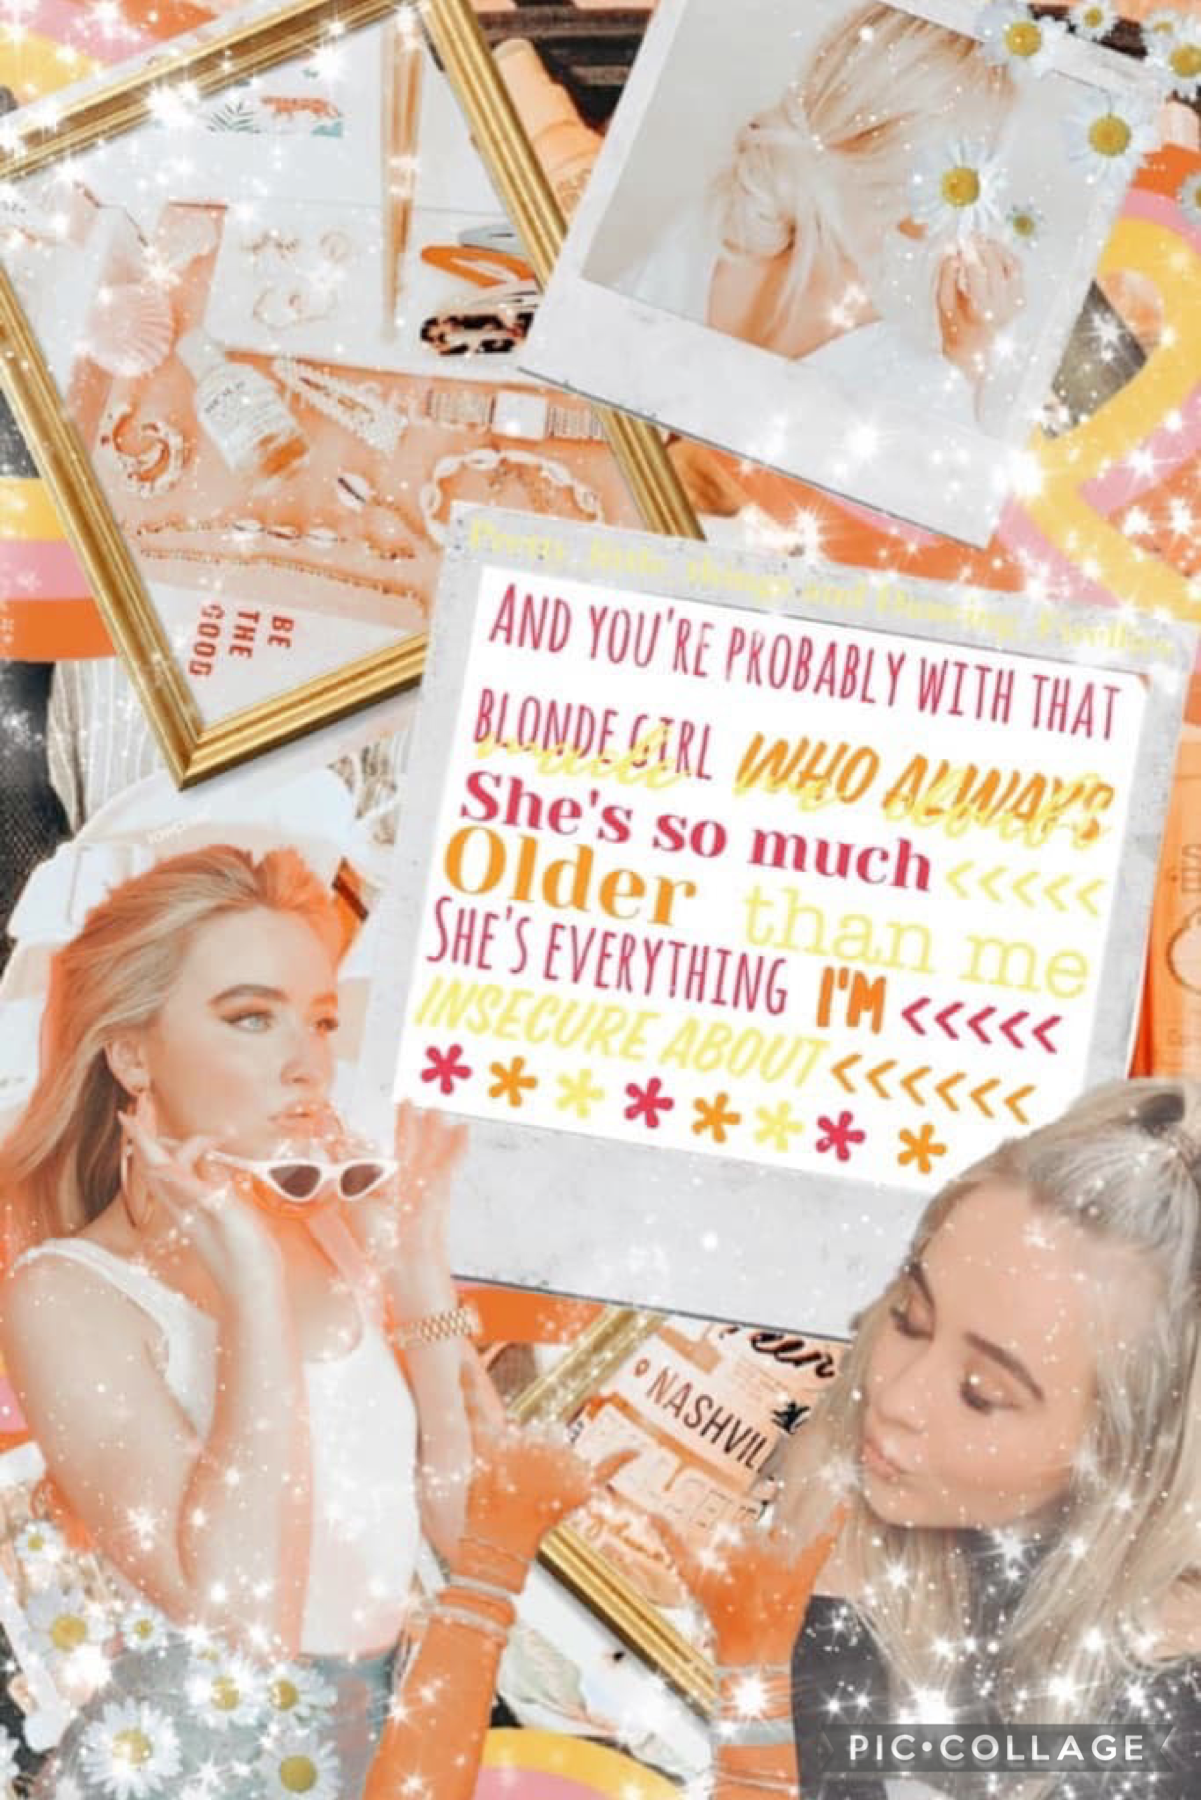 ✨happy monday✨
collab w the amazing Dancing_Fireflies!She did text and i did bg💕q:does anybody have that girl (the blonde girl) in your life rn? a:yeahhhh😔